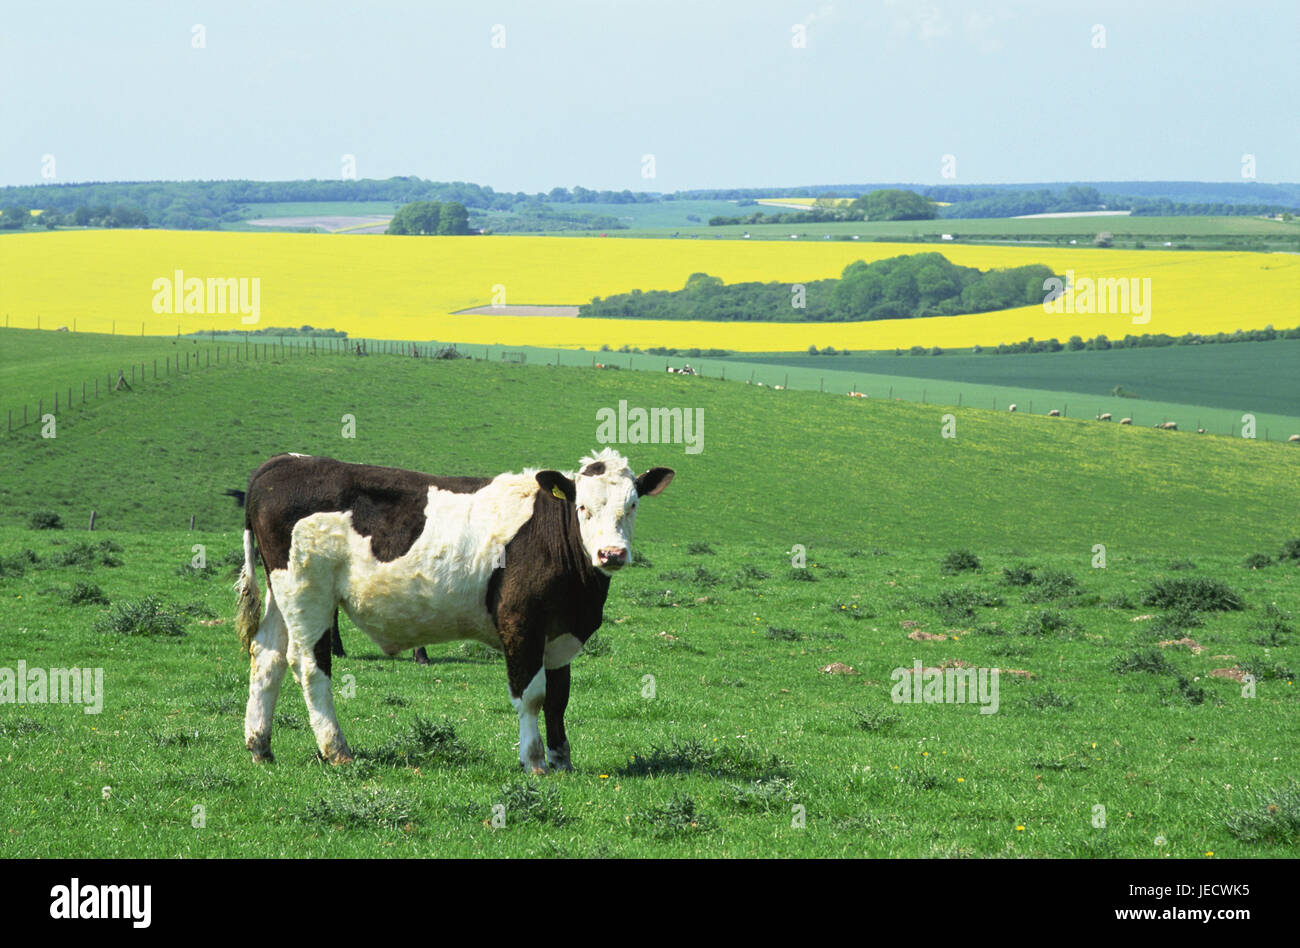 Great Britain, England, Wiltshire, field scenery, cow, Europe, scenery, fields, meadows, pastures, view, width, distance, agriculture, cattle breeding, keeping of pets, animal, mammal, benefit animal, cortexes, outside, open land position, rurally, green, yellow, Stock Photo